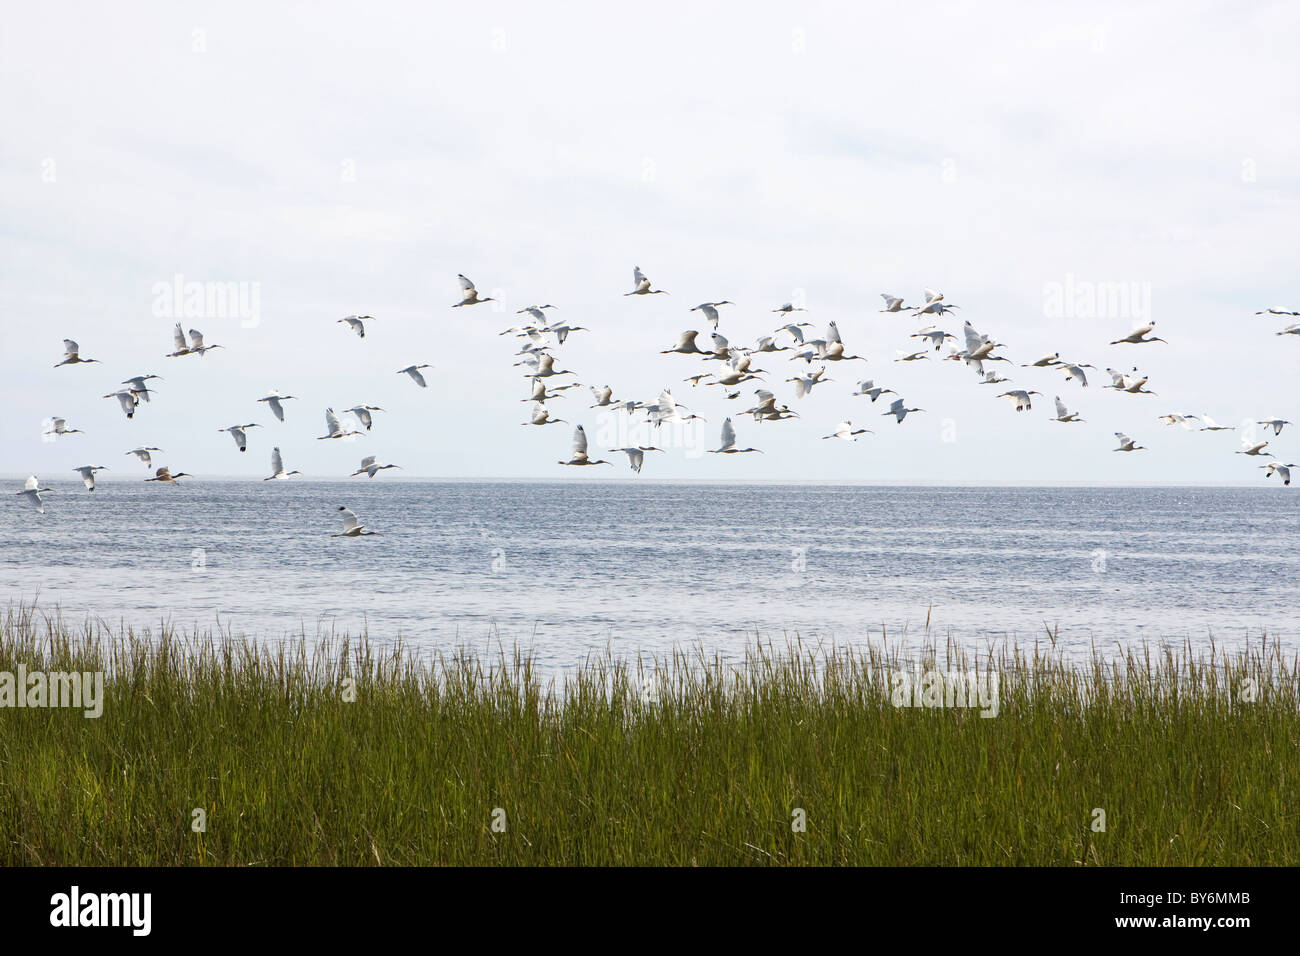 A flock of White Ibis soar across Apalachee Bay at St. Marks Wildlife Refuge in North Florida. Stock Photo